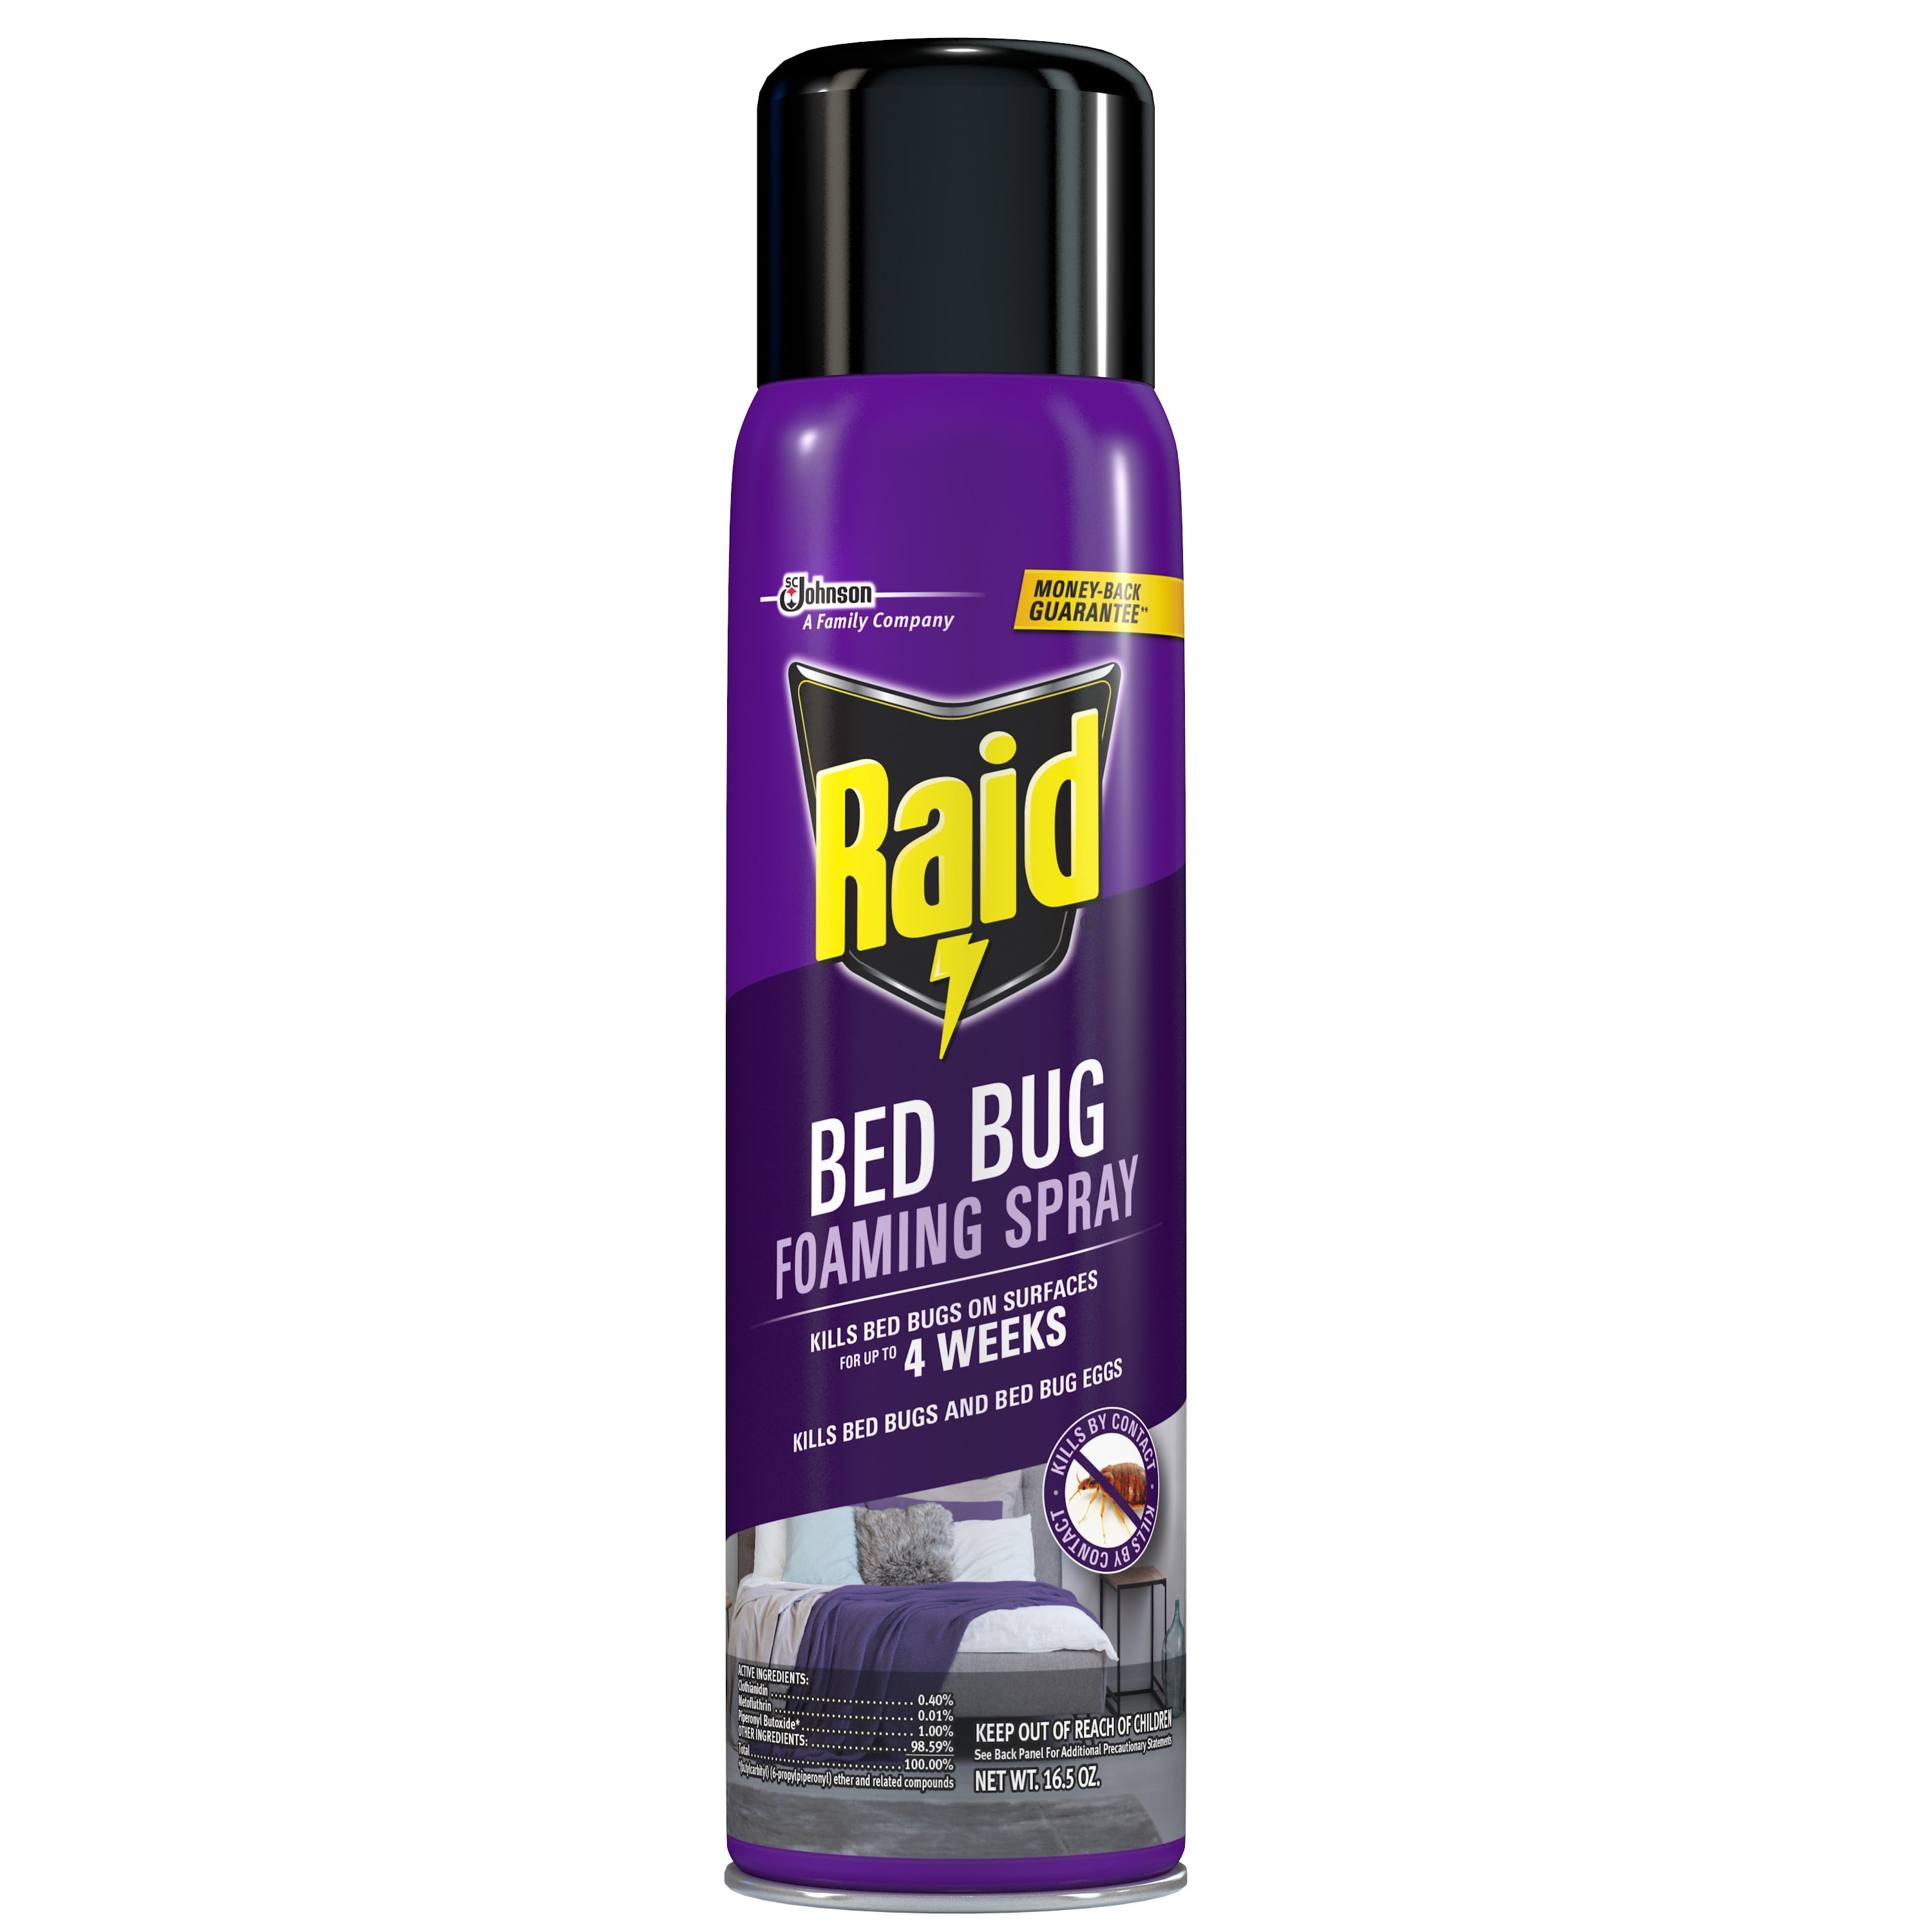 Where to buy bed bug killer